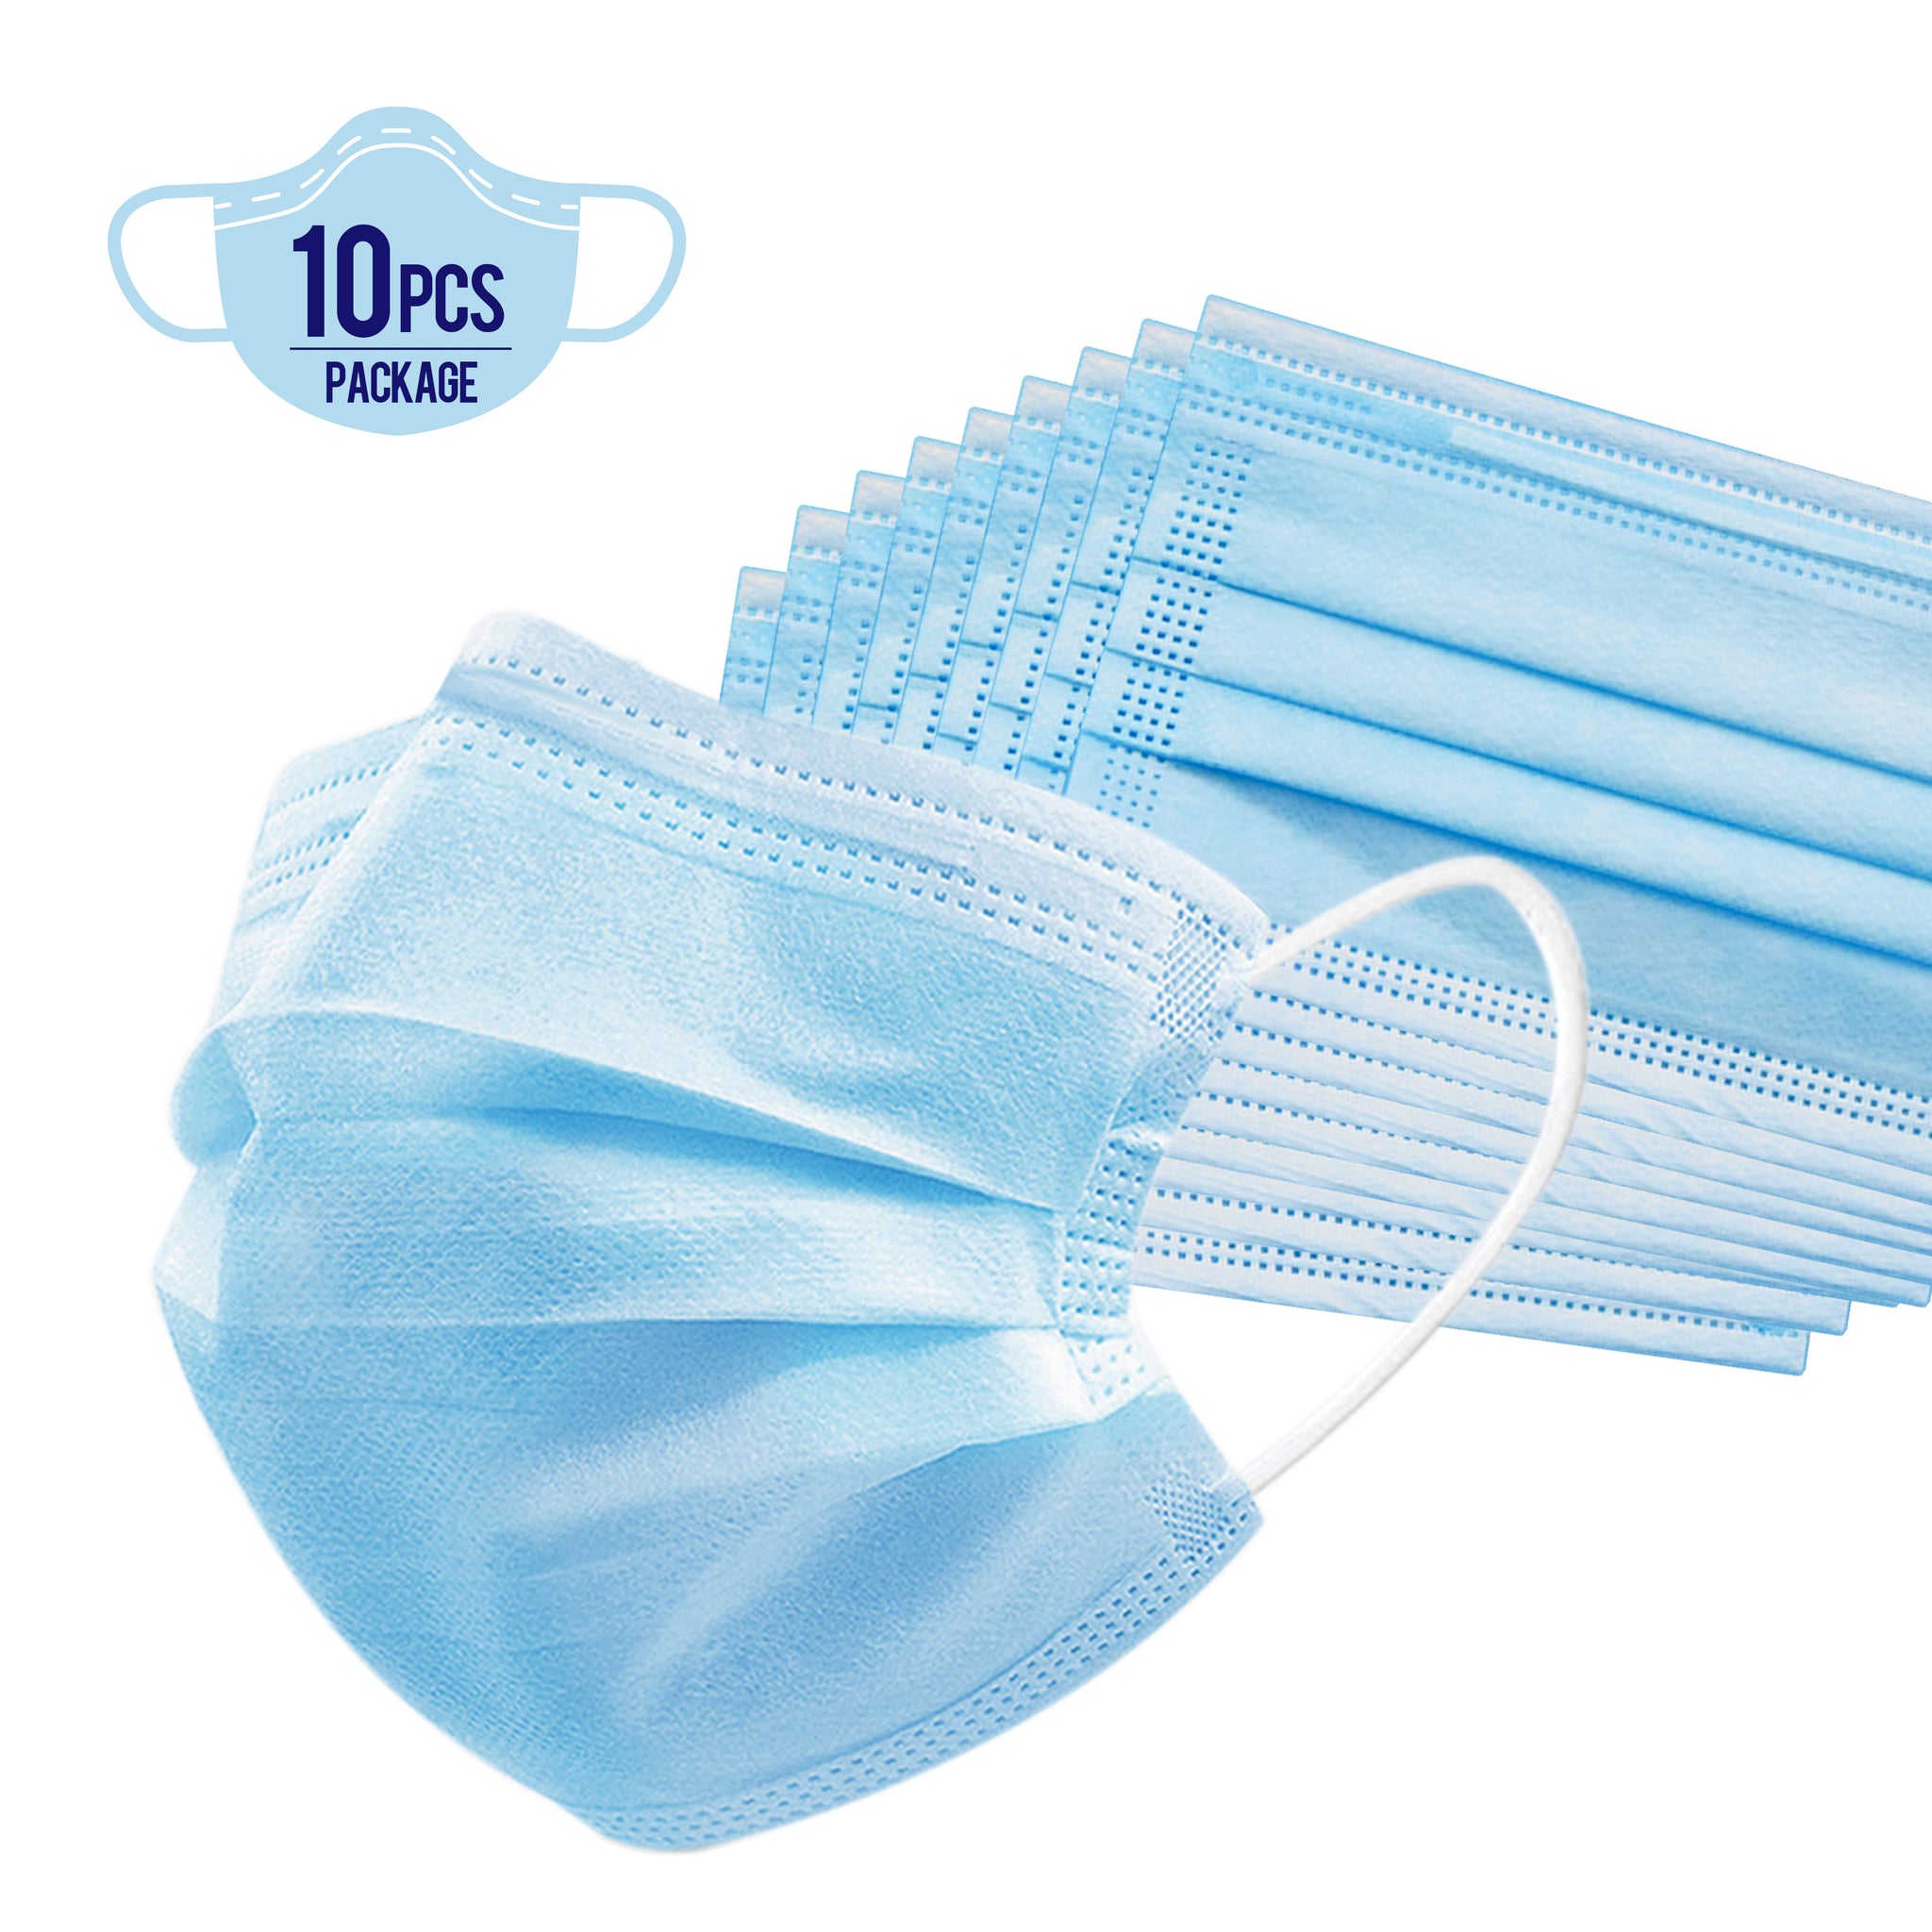 3 Layer / 3 Ply Disposable Face Mask (Pack of 10)